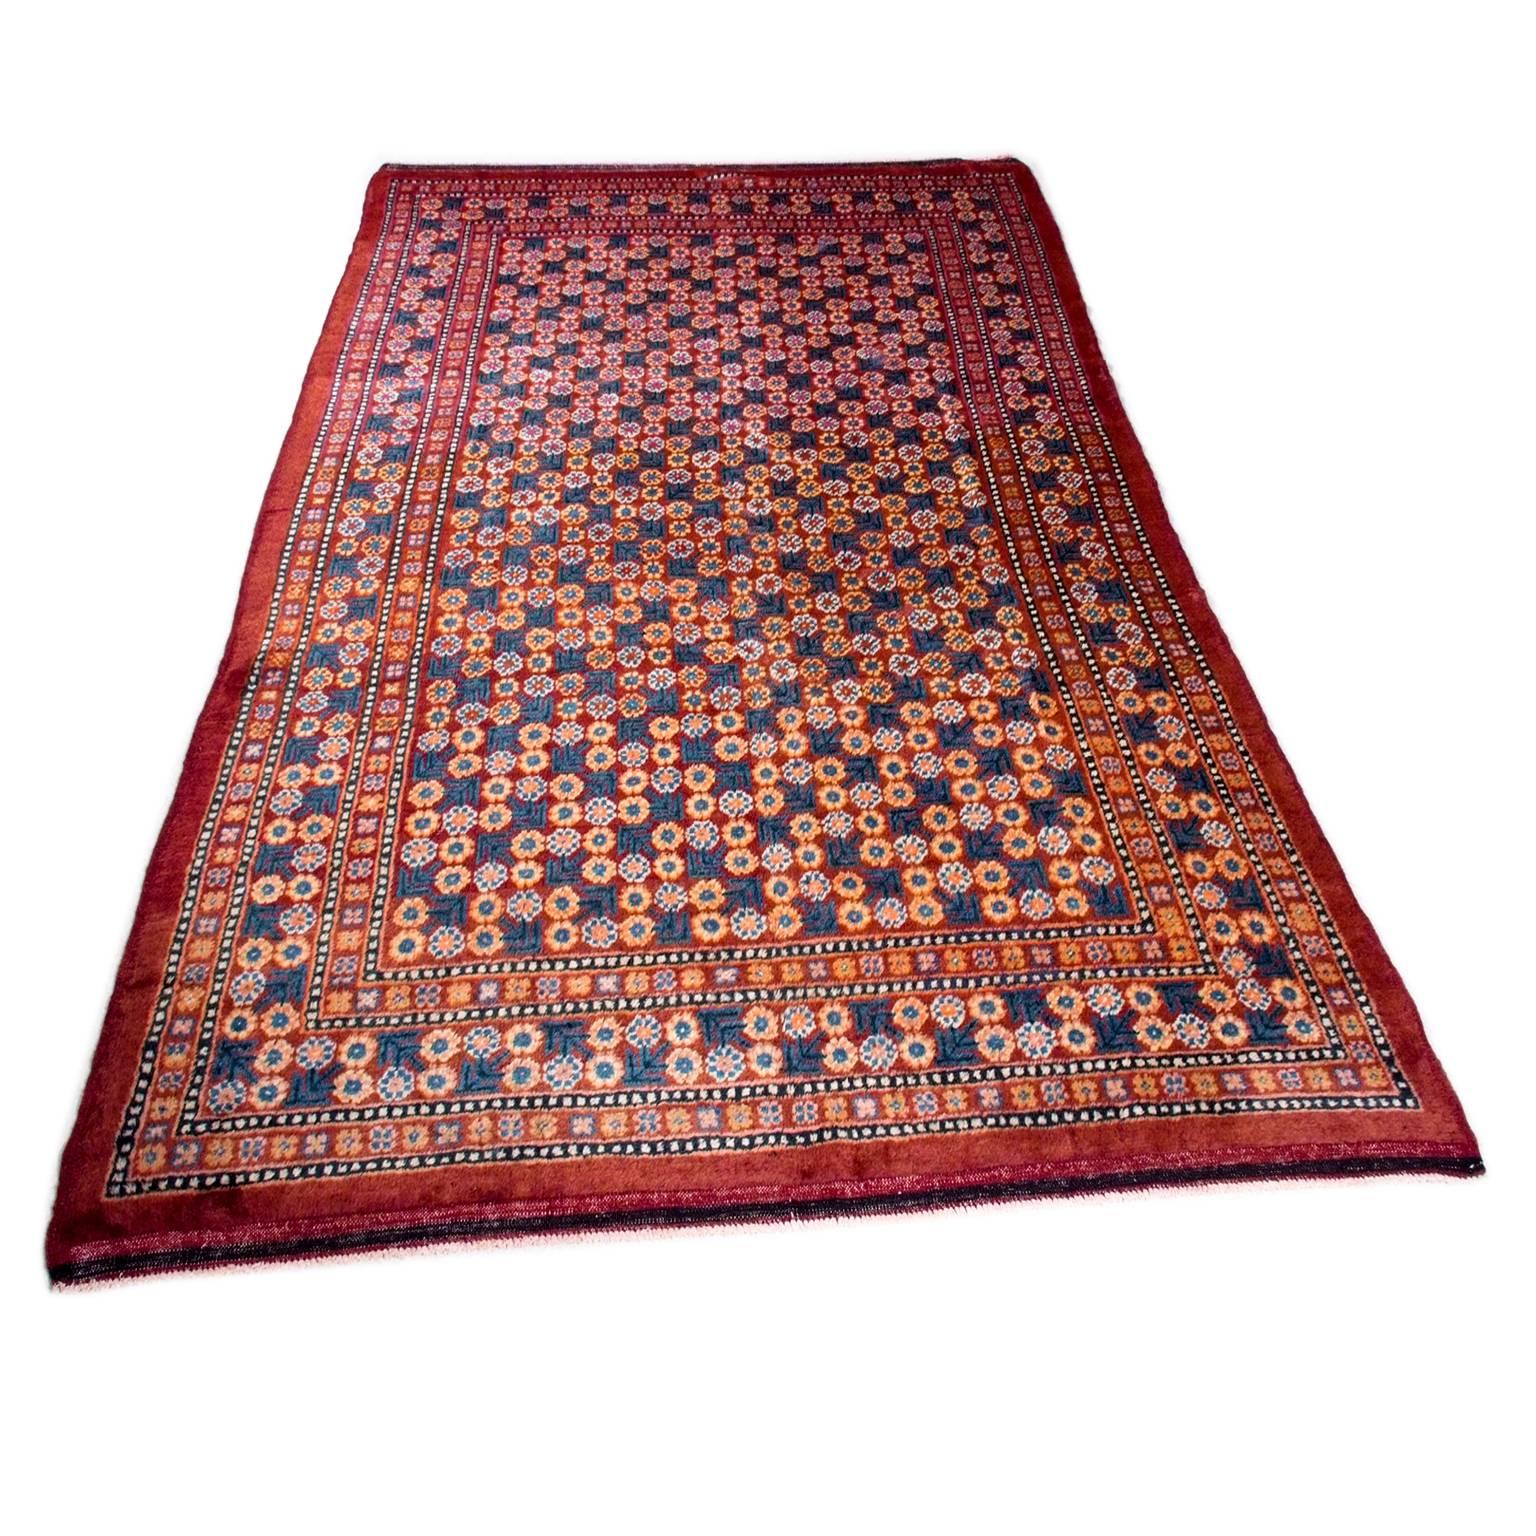 20th century Samarkand carpet with all-over design. Very decorative piece with stunning colors.